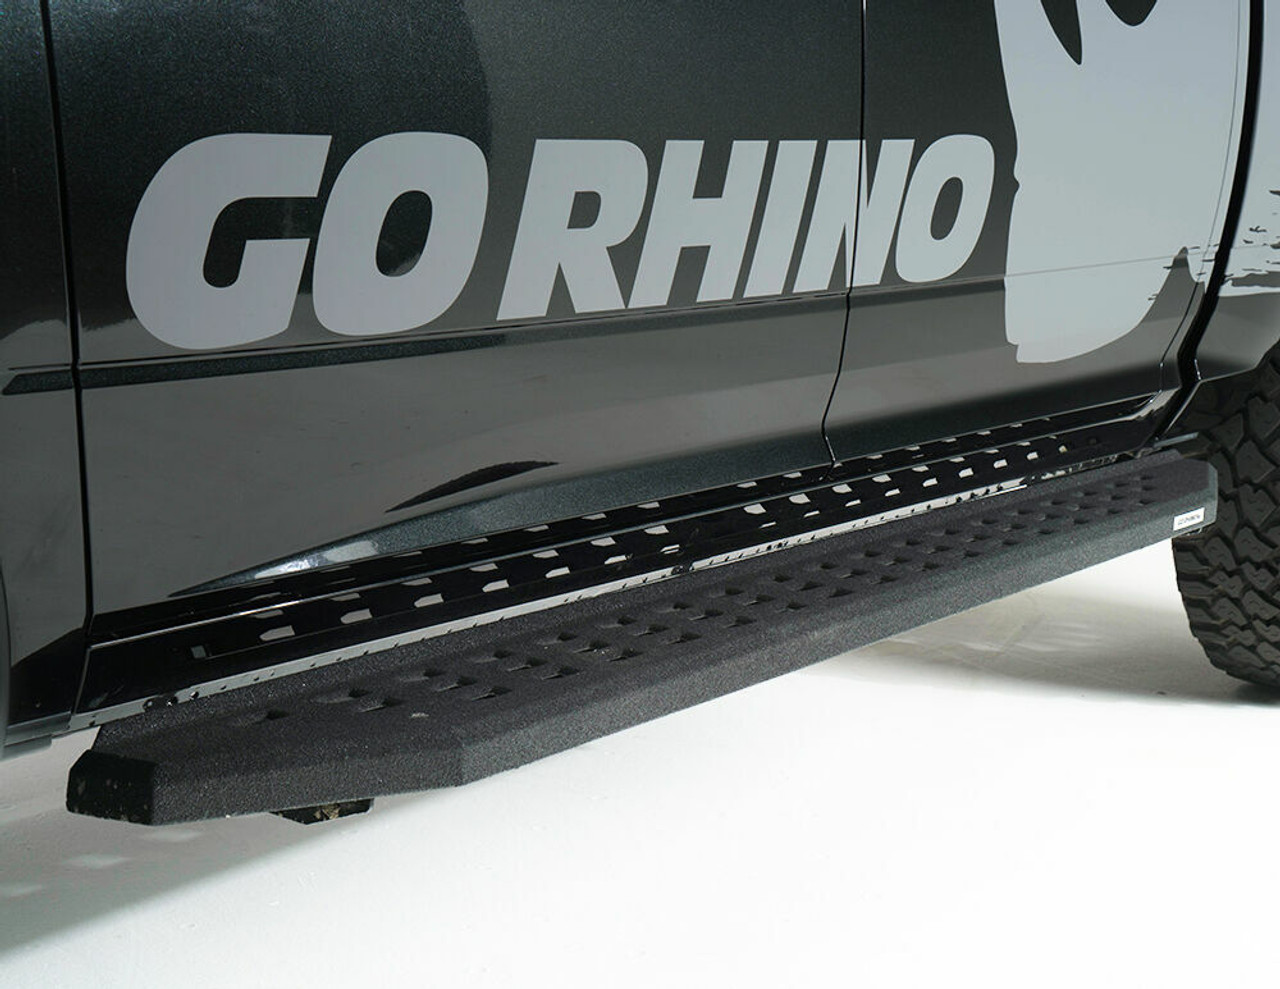 Go Rhino 6940488720T Chevy, Silverado 2500HD, 3500HD, 2020-2021, RB20 Running boards - Kit:  2 pair RB20 Drop Steps, Galvanized Steel, Bedliner coating, 69400087T RB20 + 6940485 RB Brackets + (2) 69420000T Drop Step, New Body Style Only